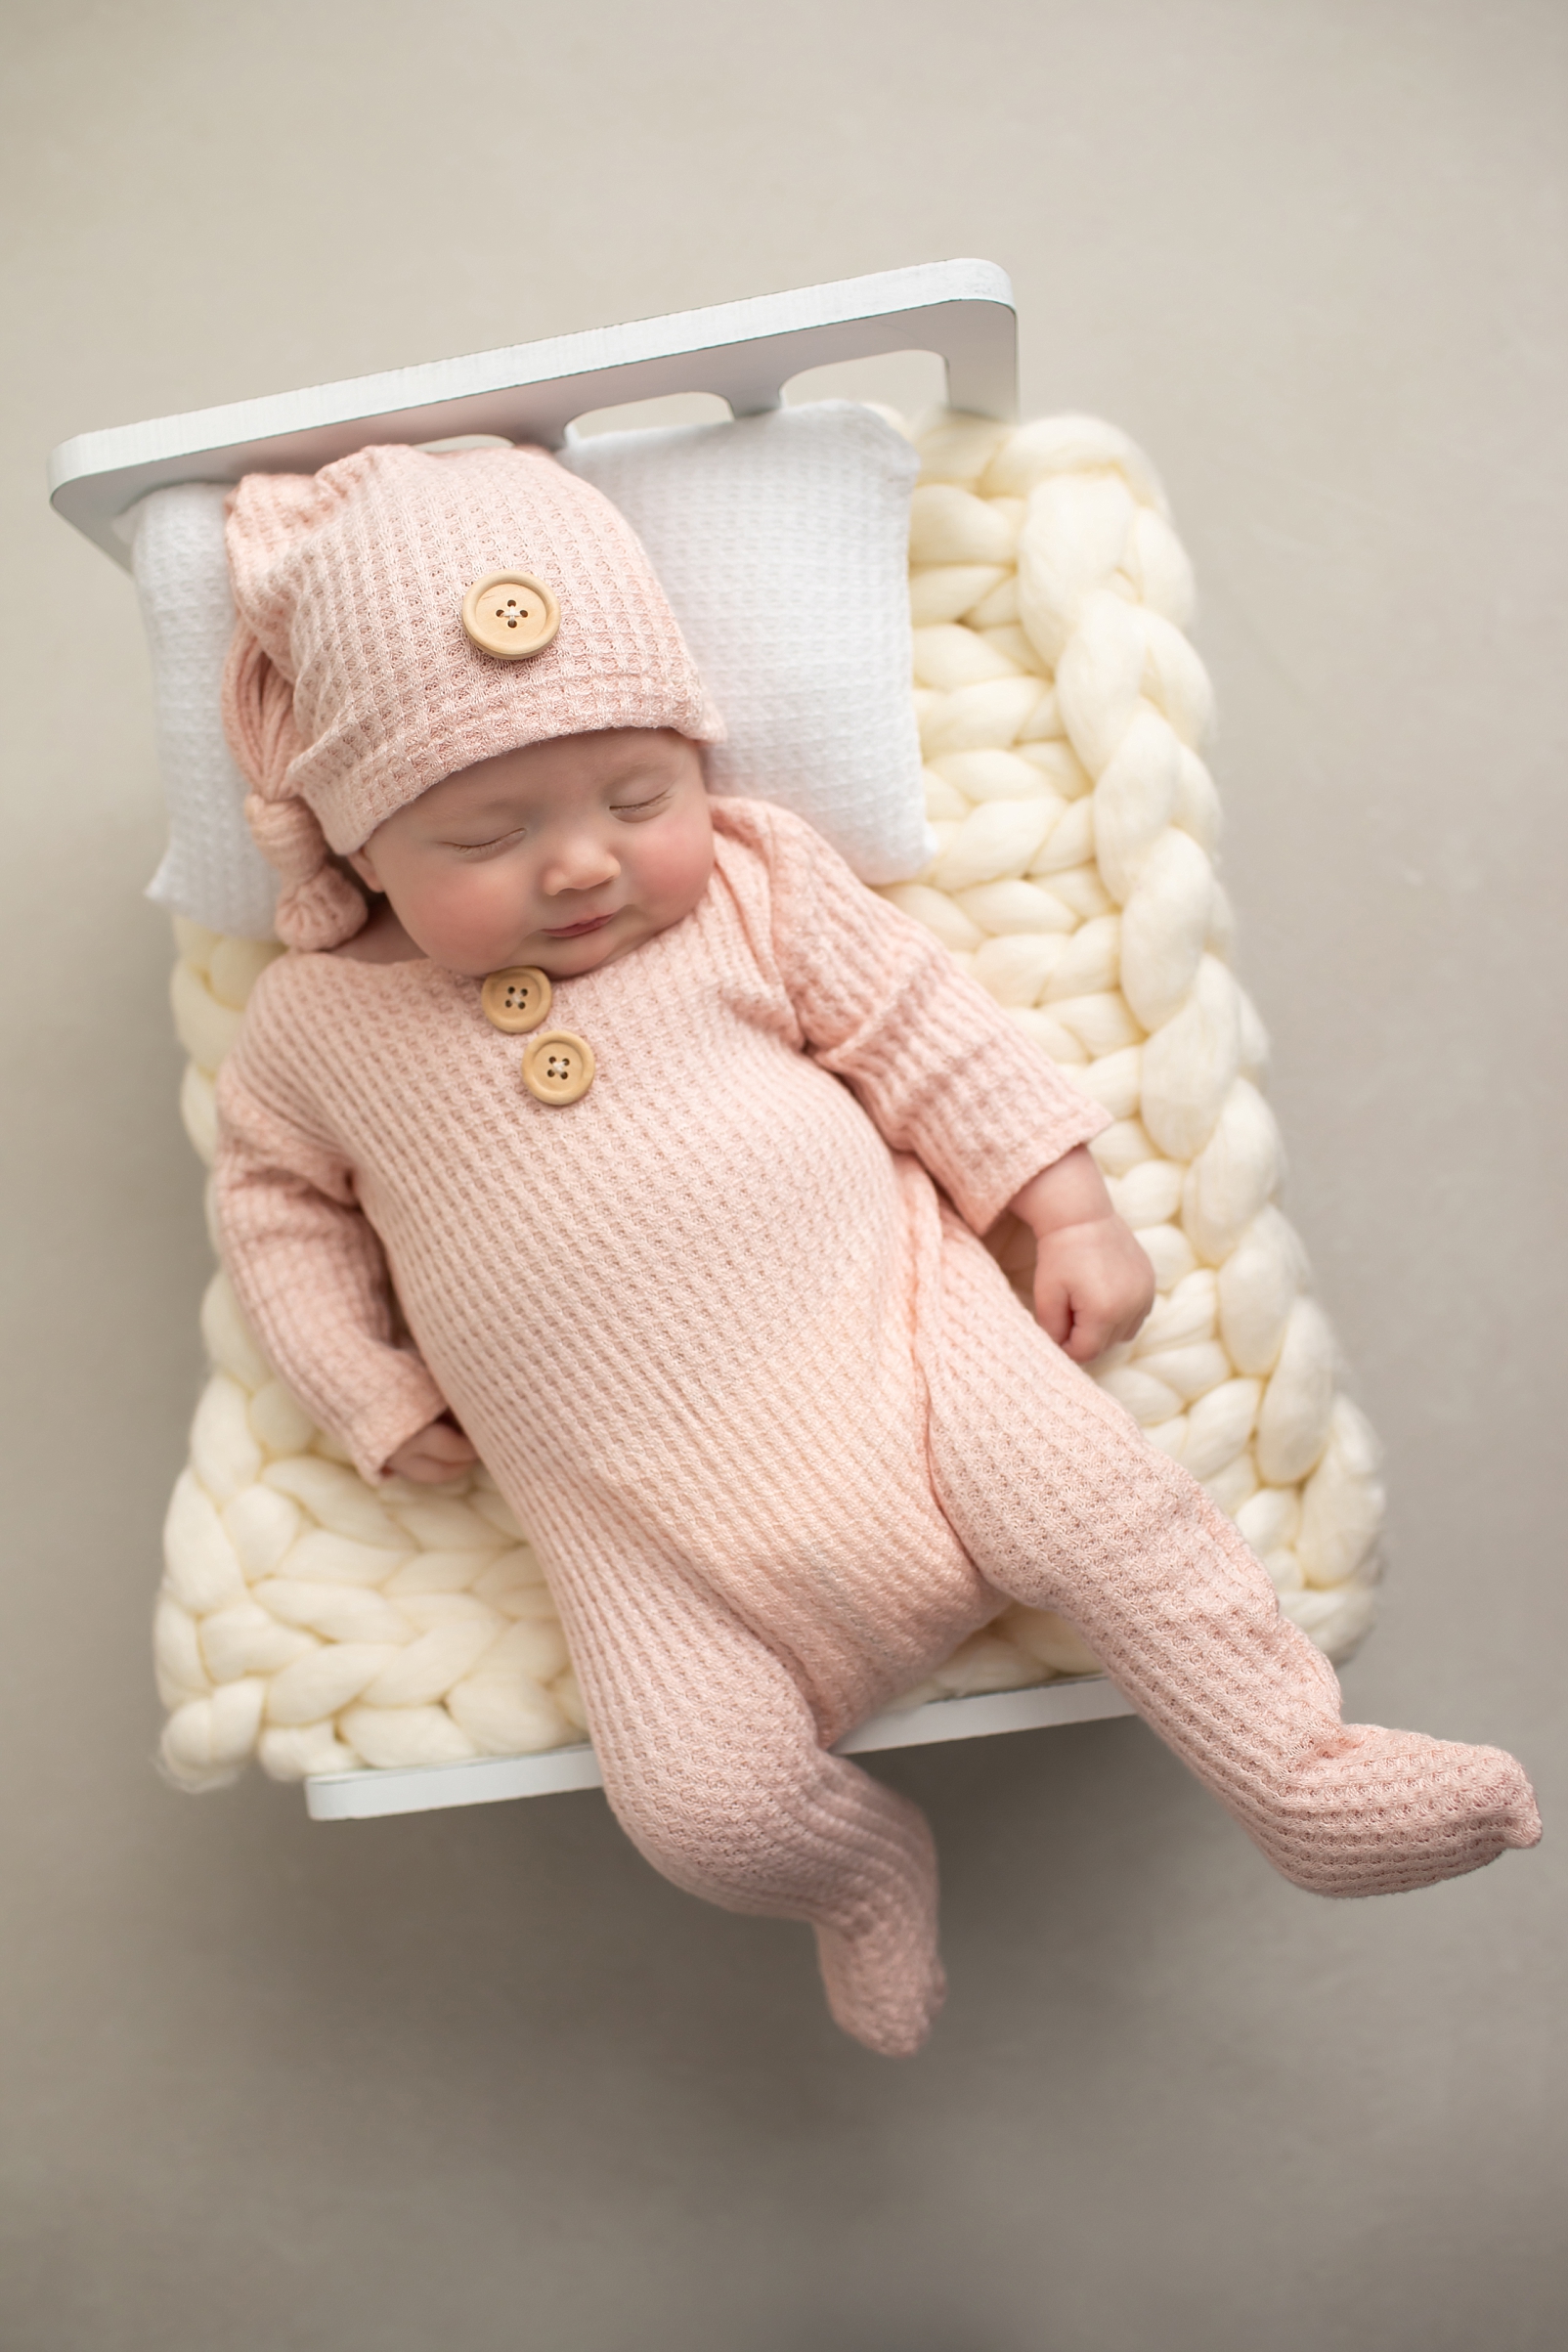 Newborn girl in pink pajamas with matching hat on a newborn bed